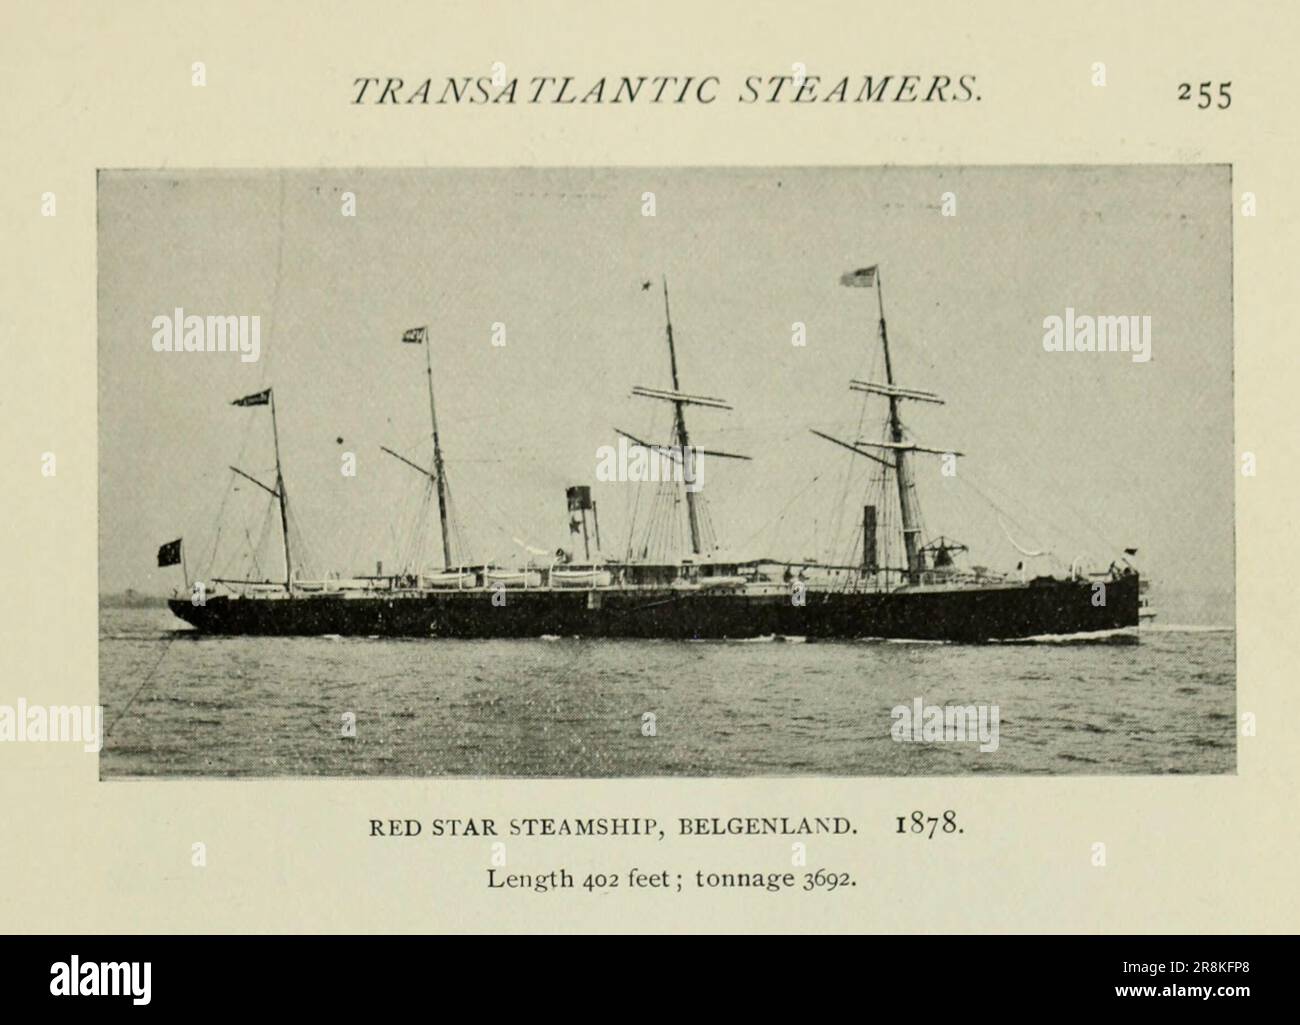 Red Star Steamship, Belgenland 1878 Length 402 feet tonnage 3692 from the Article The Transatlantic Steamers of 1856 to 1880 By Samuel Ward Stanton from The Engineering Magazine DEVOTED TO INDUSTRIAL PROGRESS Volume X October 1896 NEW YORK The Engineering Magazine Co Stock Photo